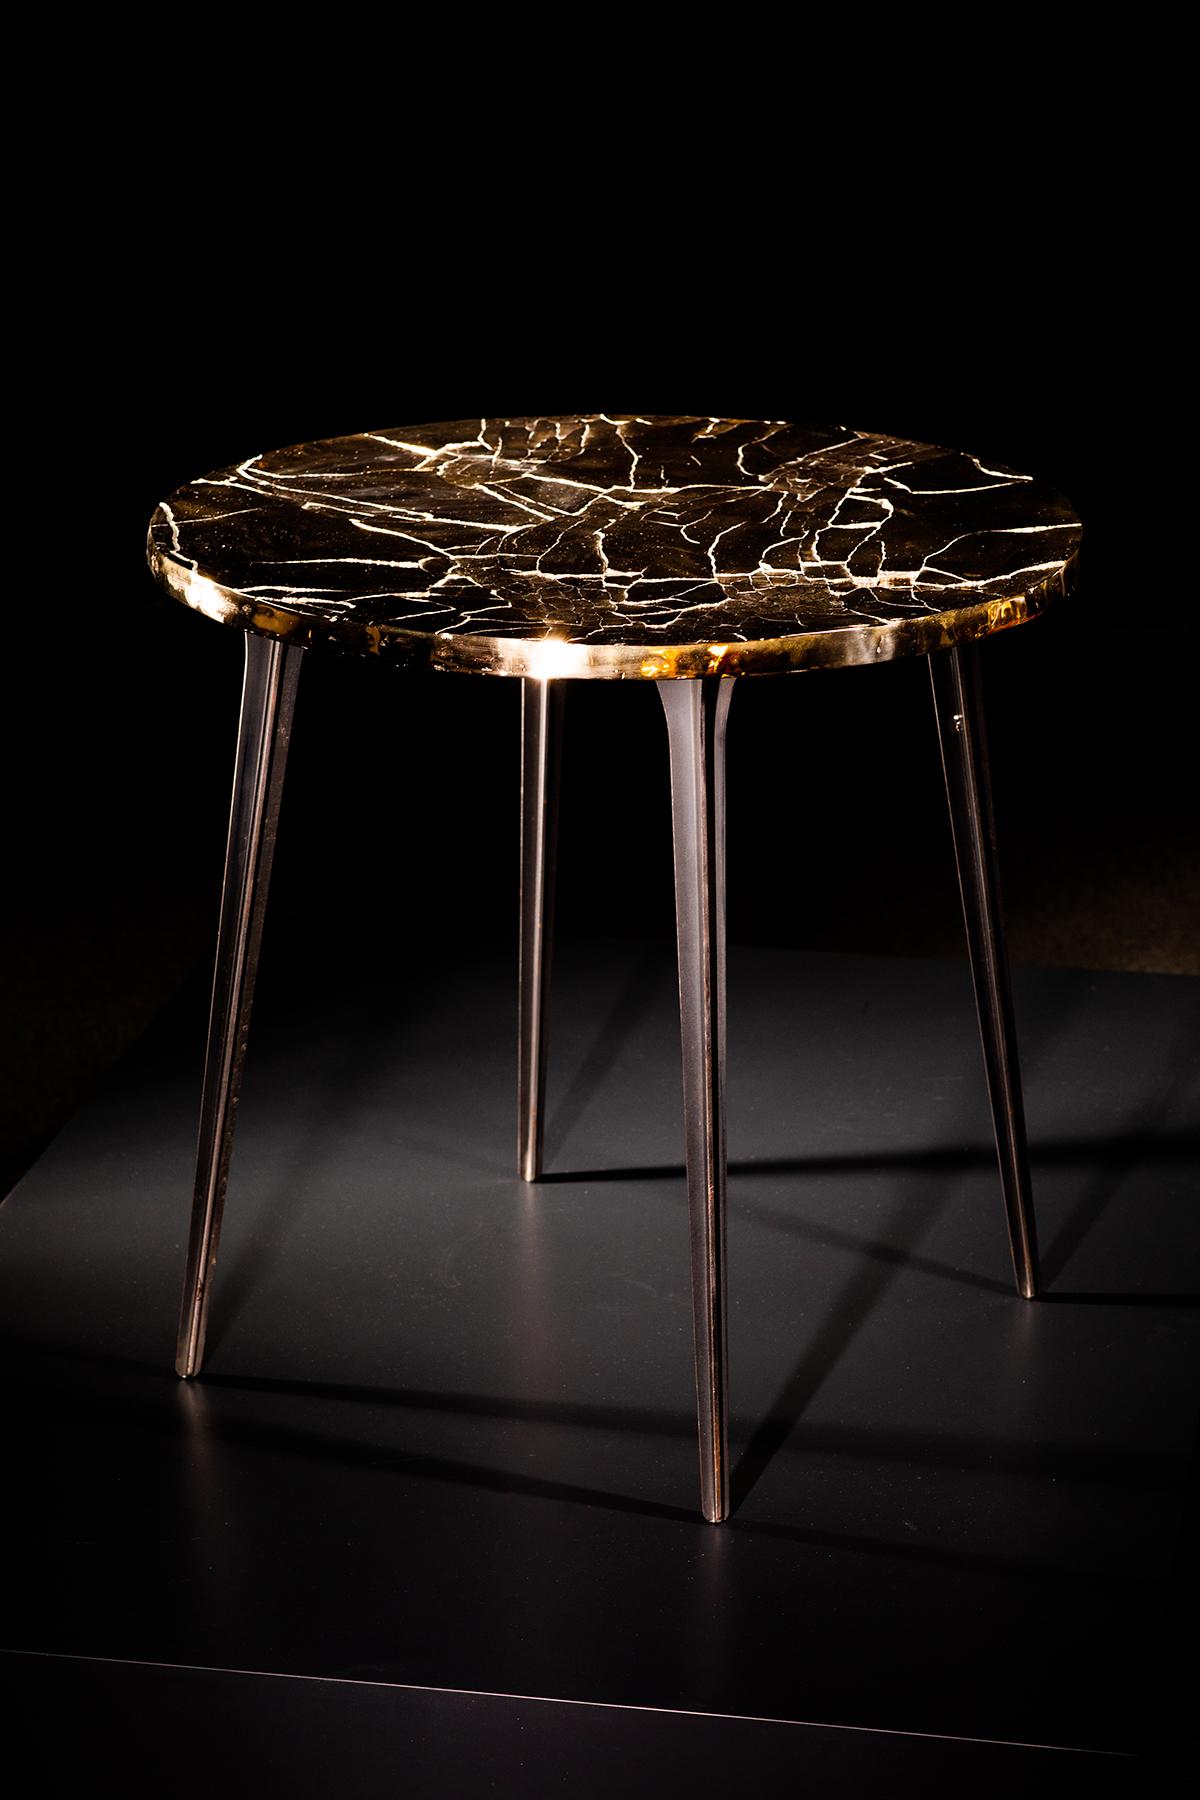 Cast bronze top in Boulloud’s fractured style, finished with a high shine, raised on partially patinated steel legs.